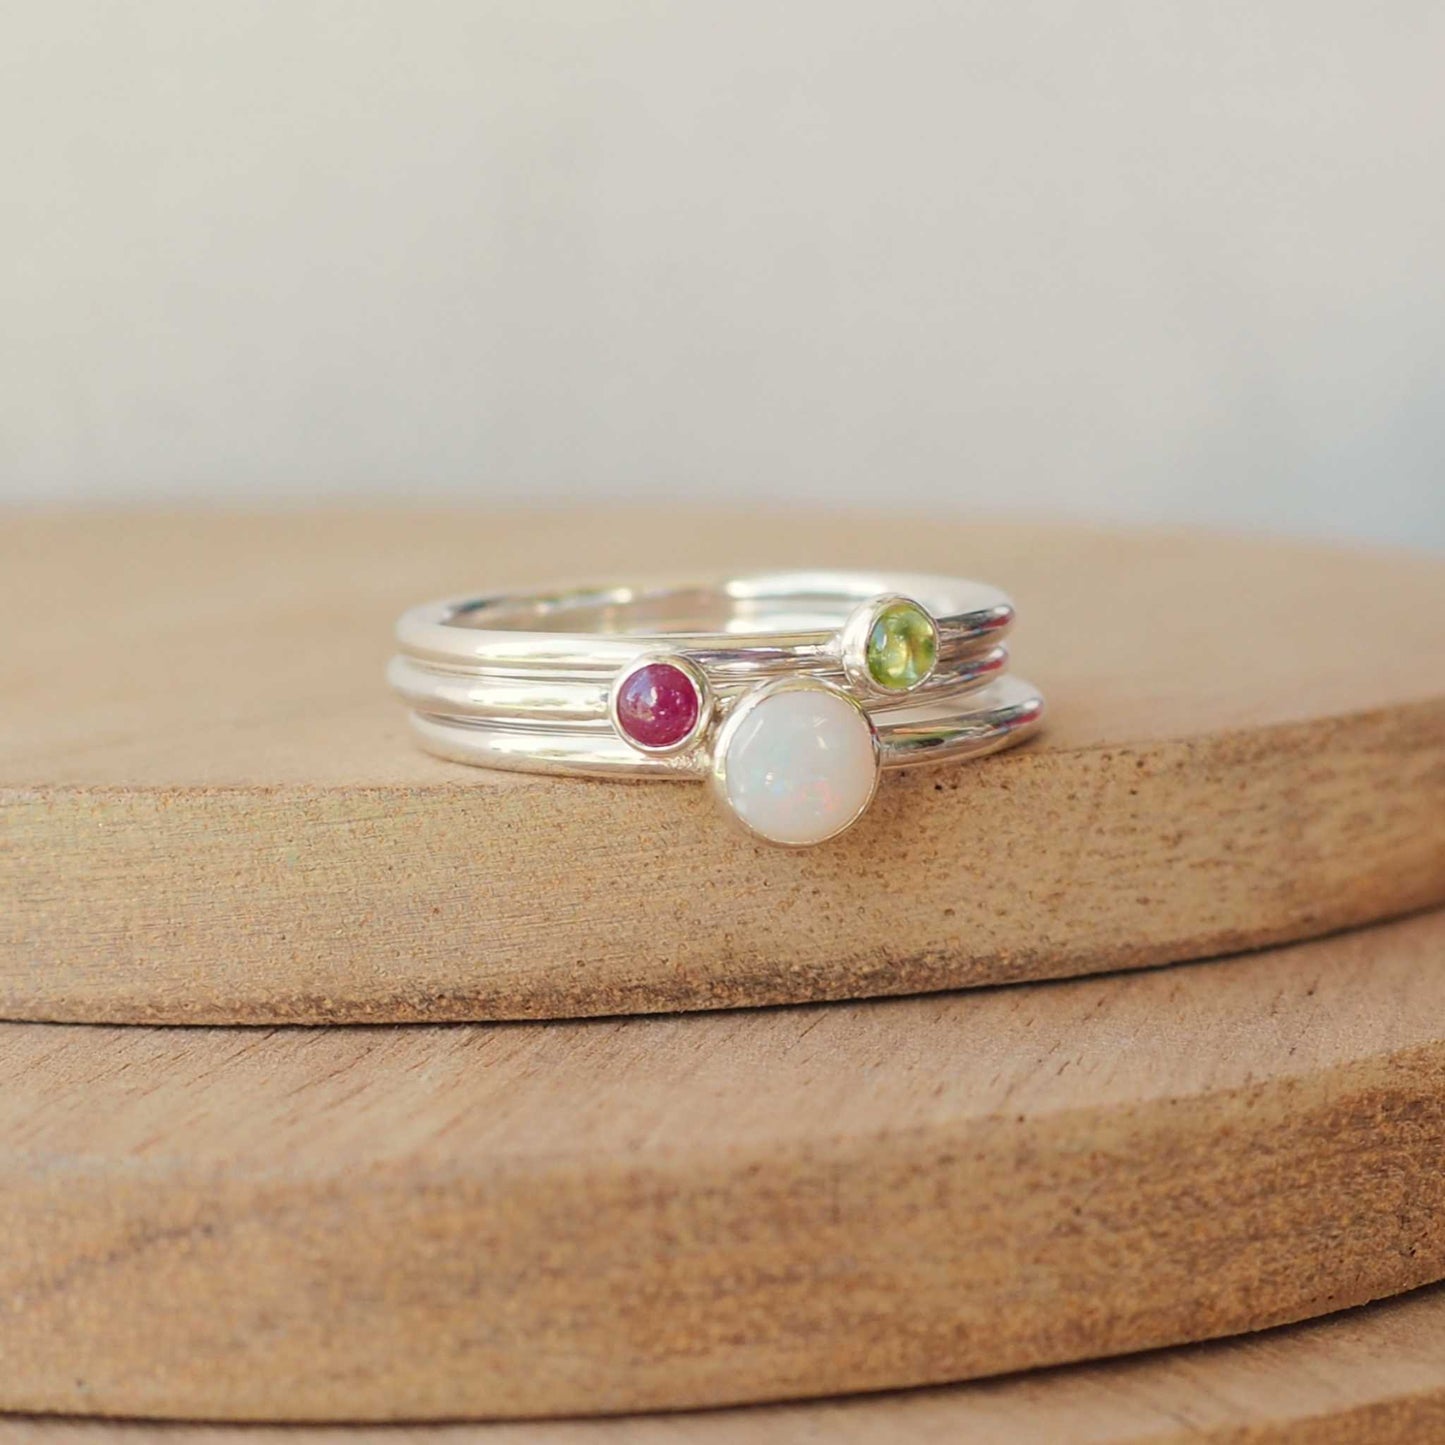 Three silver solitaire ring set with round Opal, Ruby and Peridot gemstones set onto simple round bands in a minimalist style. Handmade jewellery made in the UK